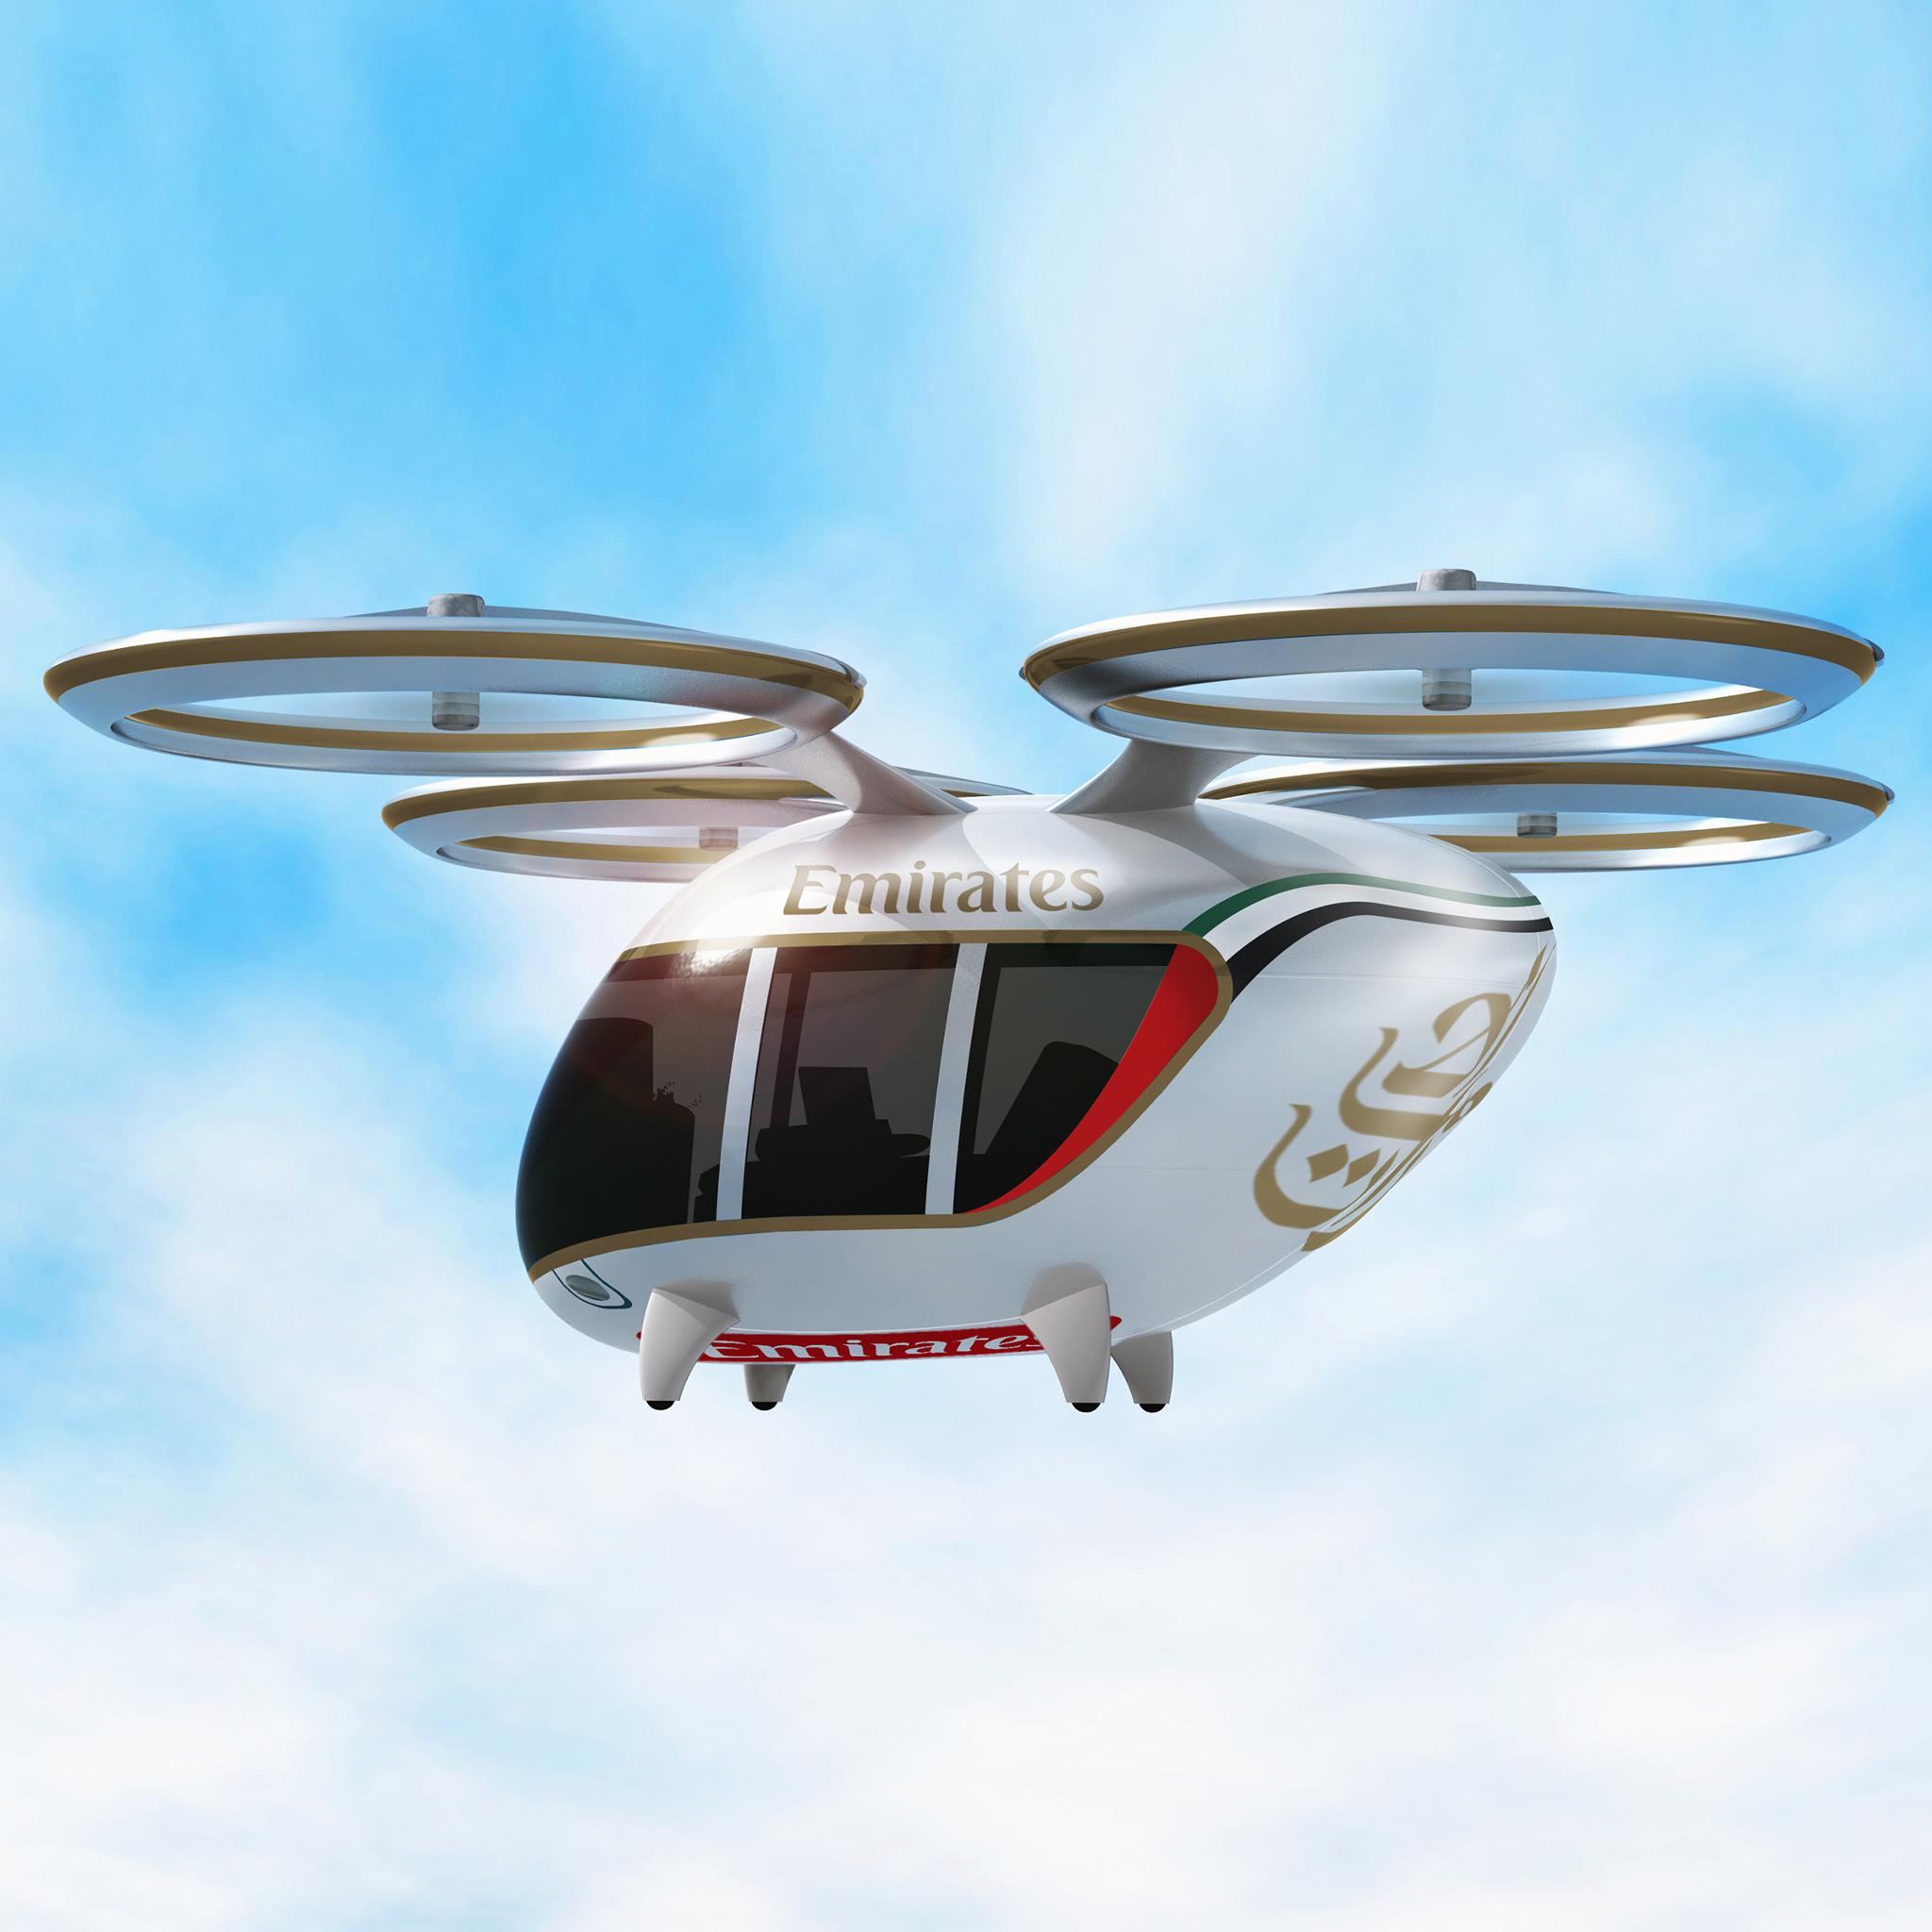 Emirates on Twitter: "Fly on our chauffeur-less drones between any location in Dubai and @DXB, from April 2020. Each drone features two fully-enclosed First Class private suites. Our new drone airport